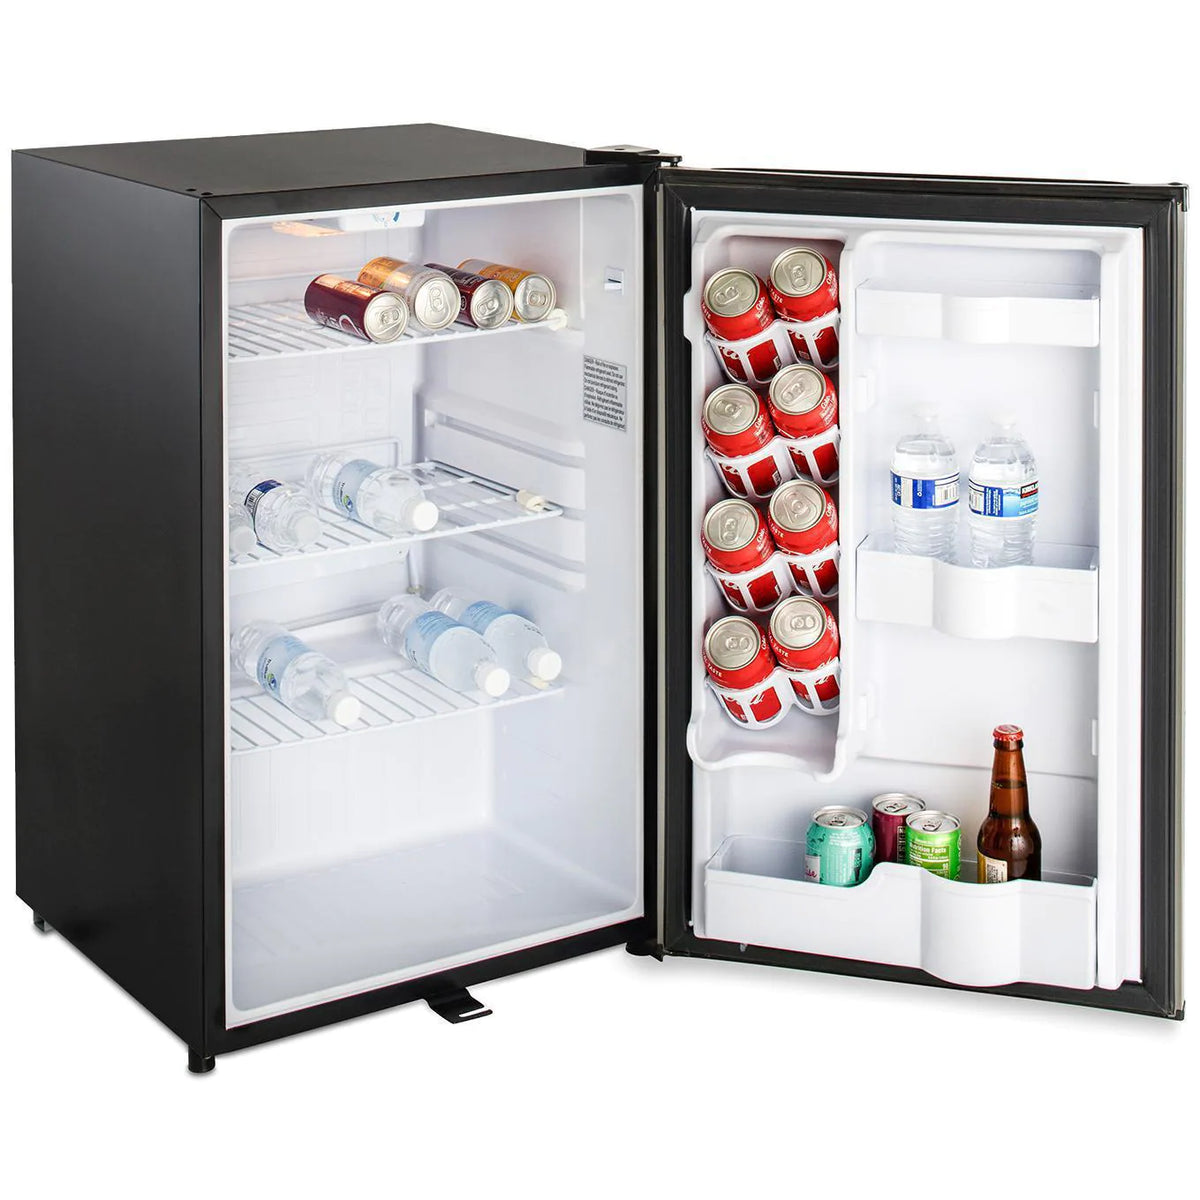 Blaze 20 Inch Outdoor Compact Refrigerator Side View with Drinks